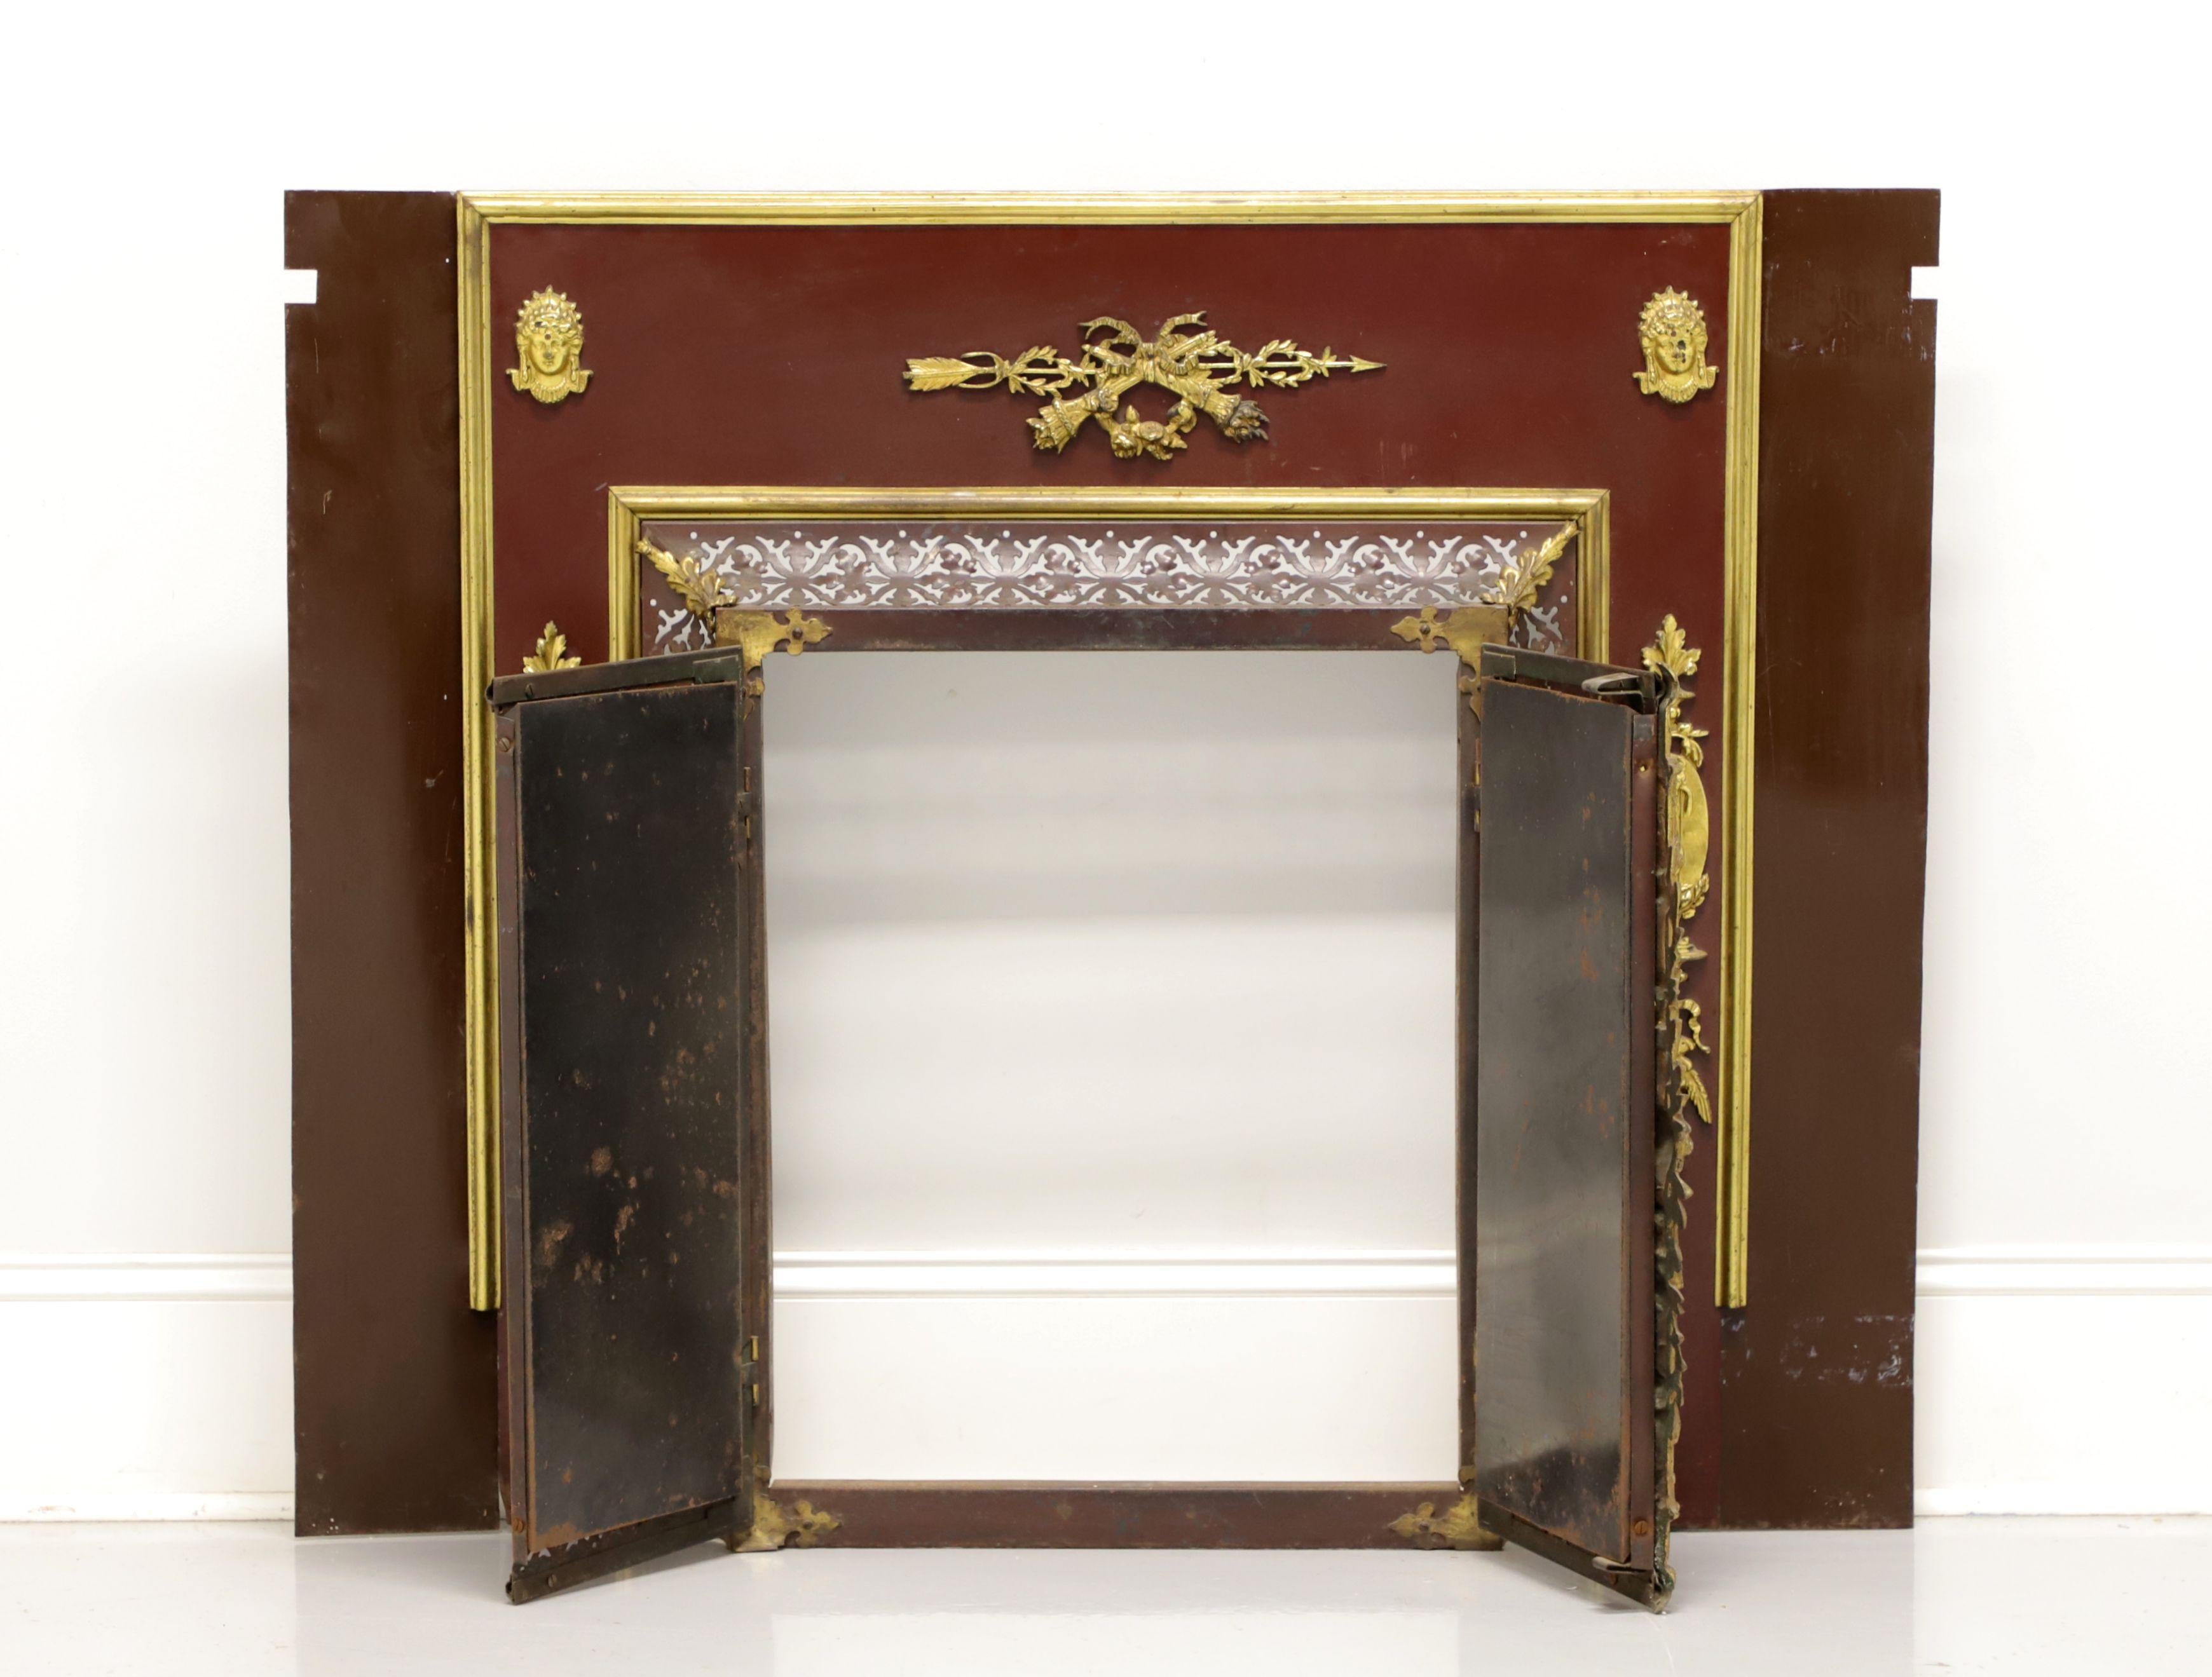 An antique French Provincial style fireplace screen with surround panels, unbranded. Bronze with decorative brass accents. Features dual doors for access to fireplace, decorative vents around the doors to allow heat to escape when doors are closed